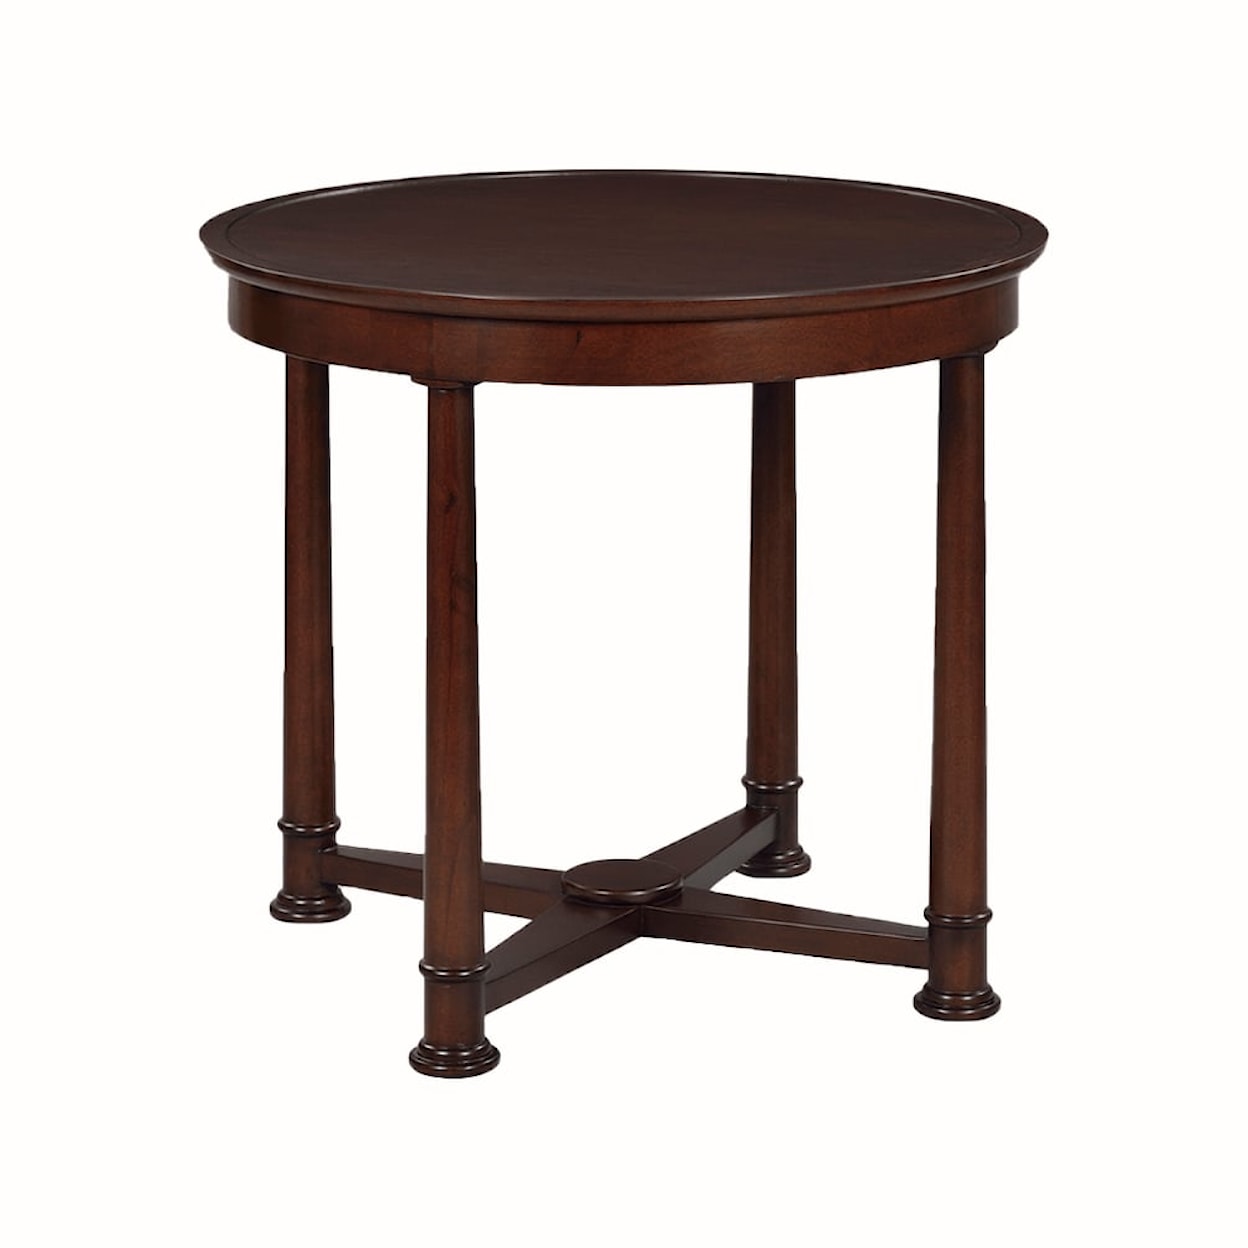 Oliver Home Furnishings End/ Side Tables OGEE EDGE, ROUND SIDE TABLE- CHOCOLATE